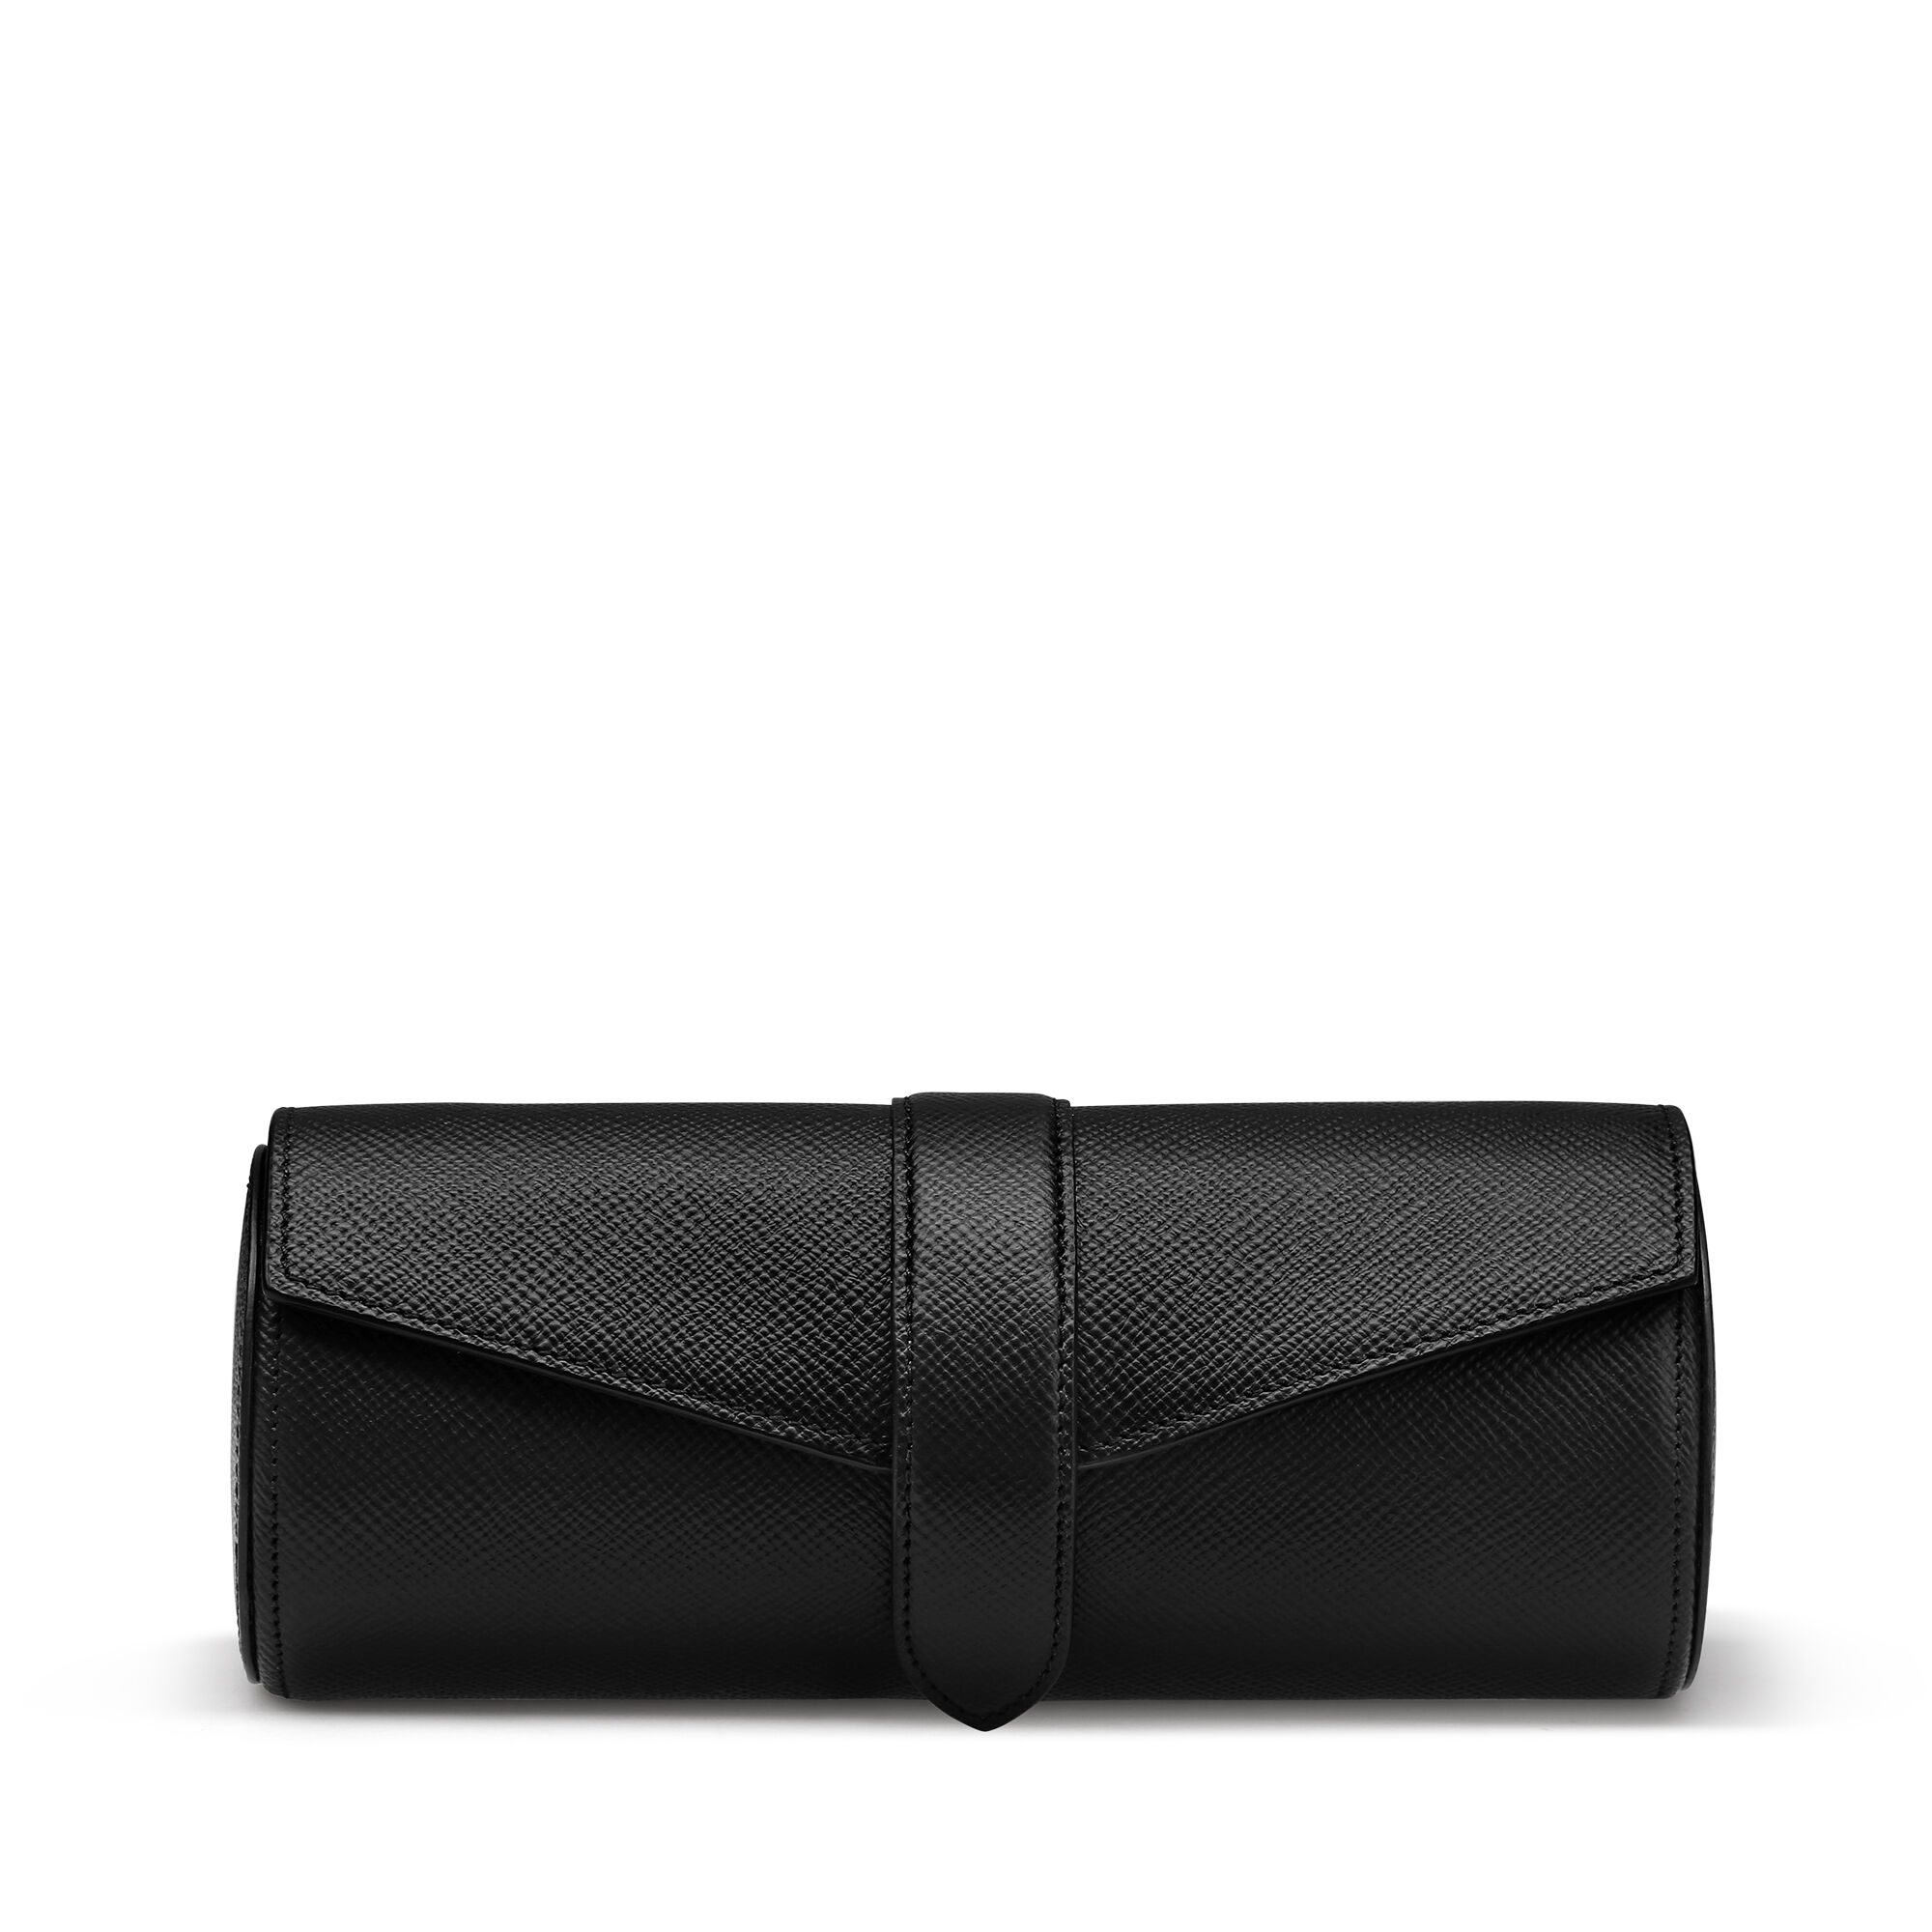 Luxury Leather Jewellery Boxes in Black | Smythson